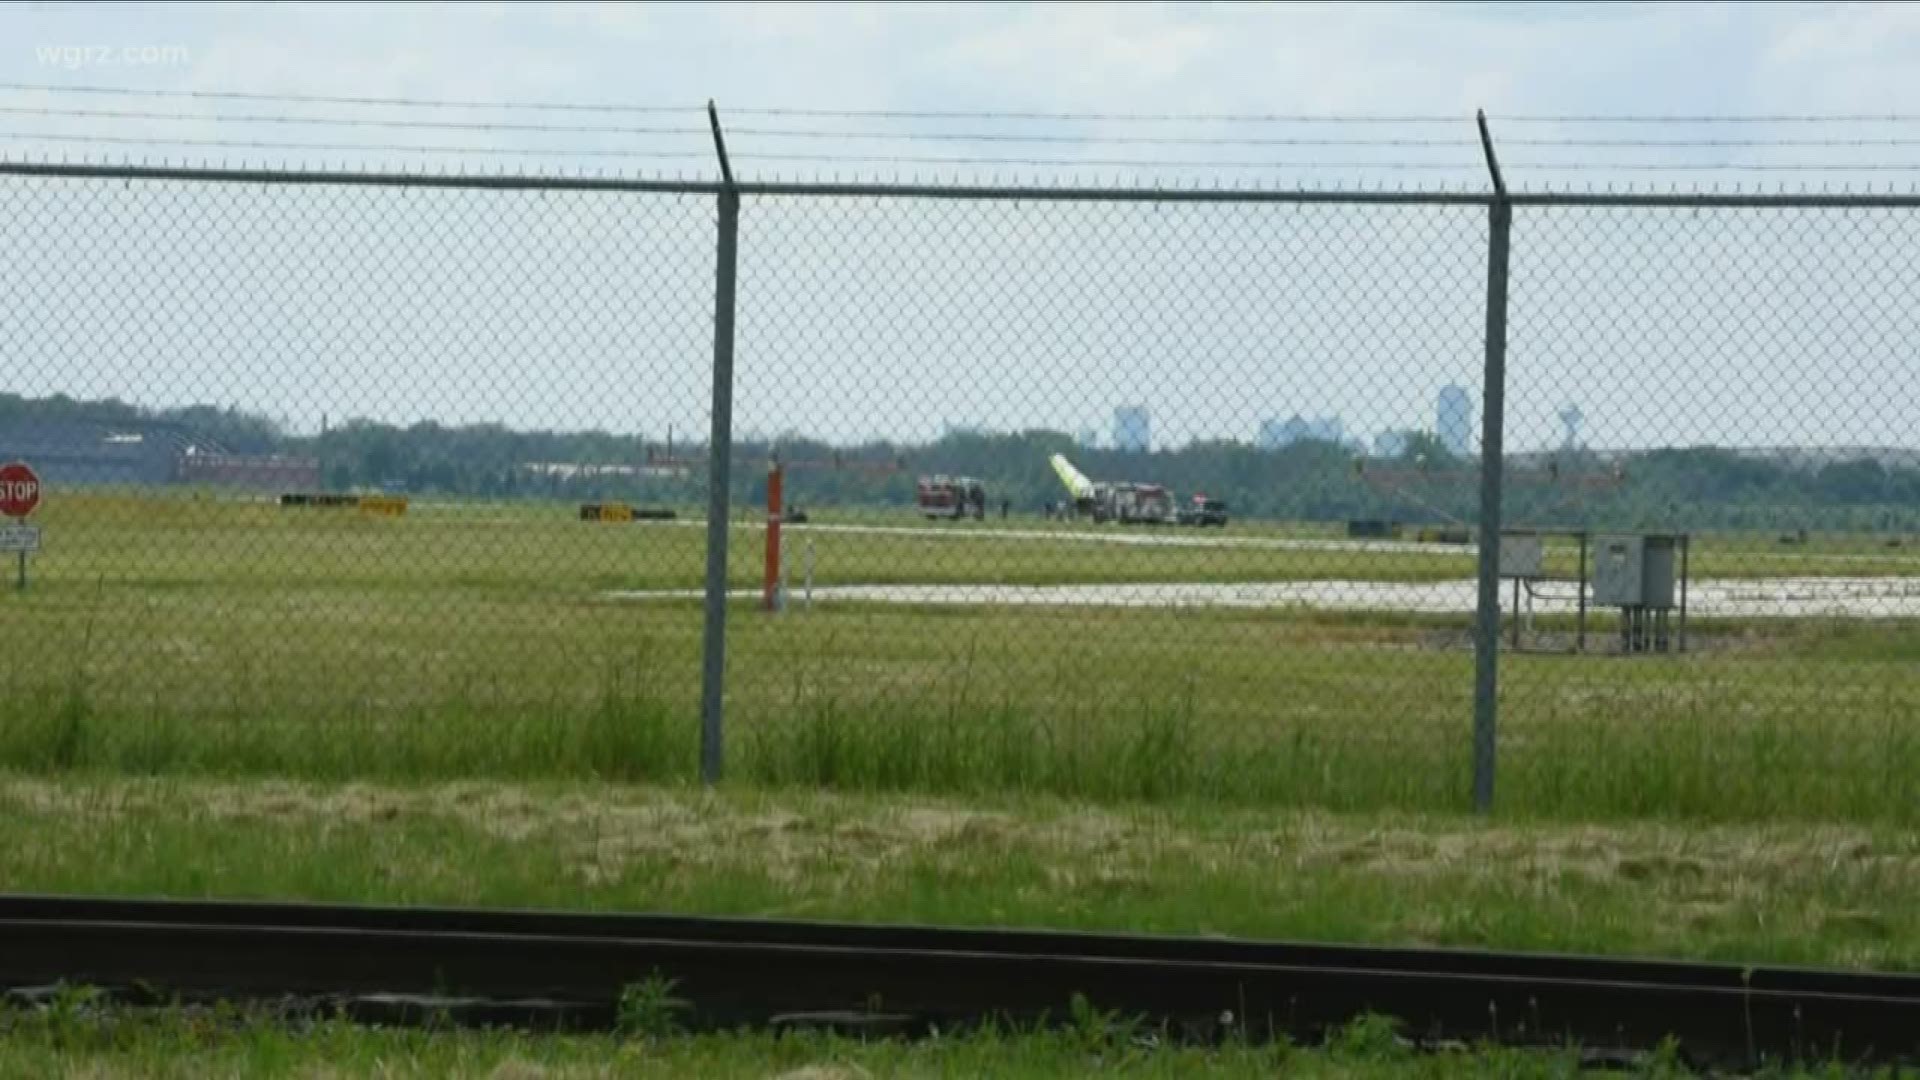 Minor injuries in rough landing at NF airport